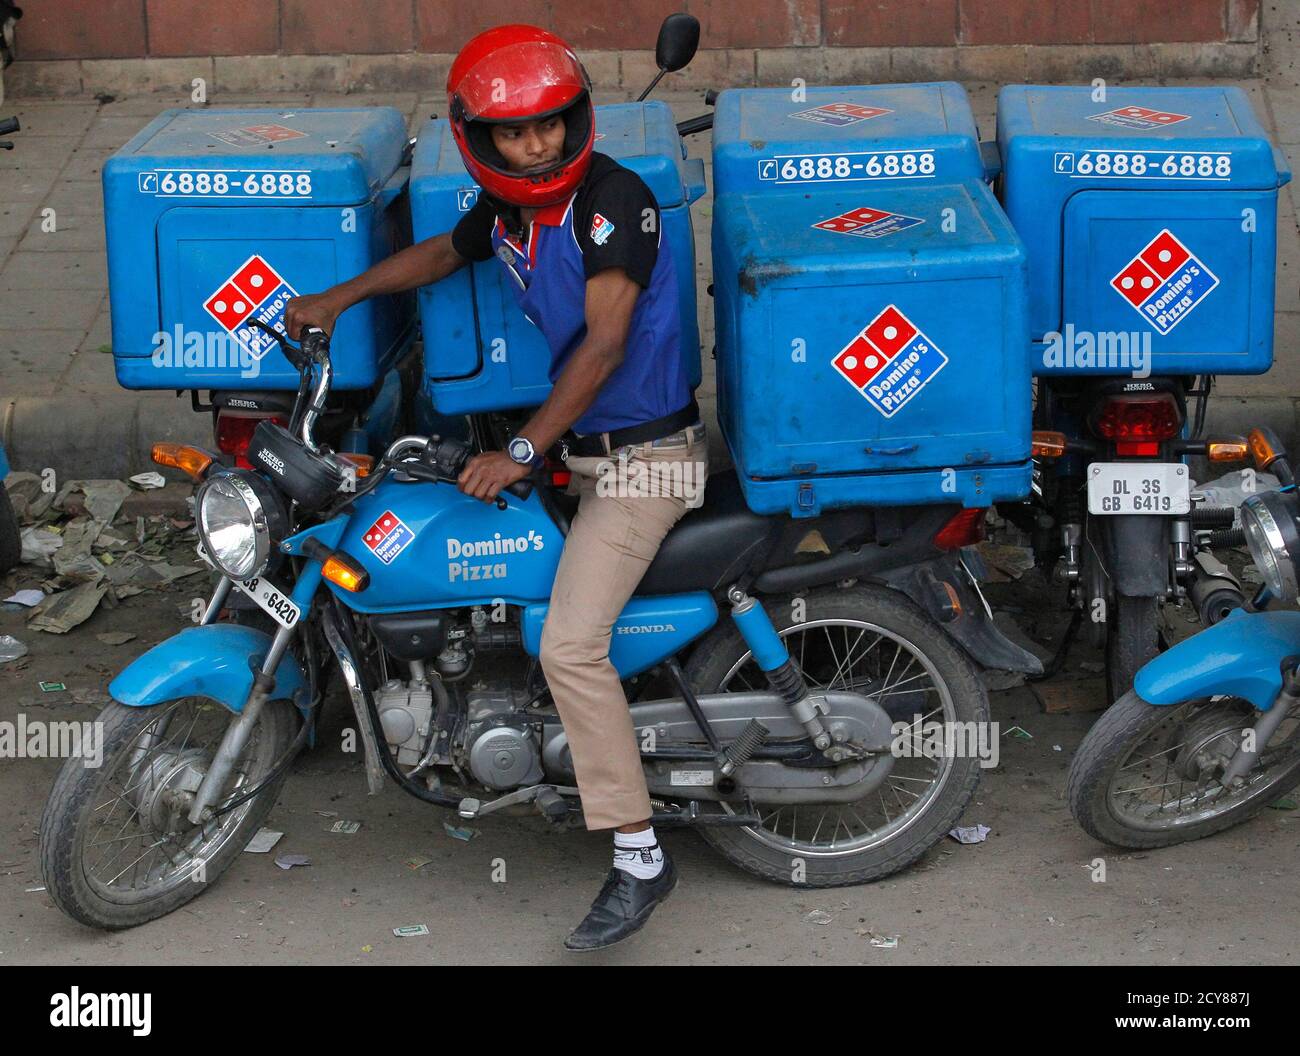 An employee rides a motorcycle to deliver Domino's Pizza to its customers  in New Delhi May 14, 2013. Global companies betting on India's potential as  a consumer market are looking beyond the